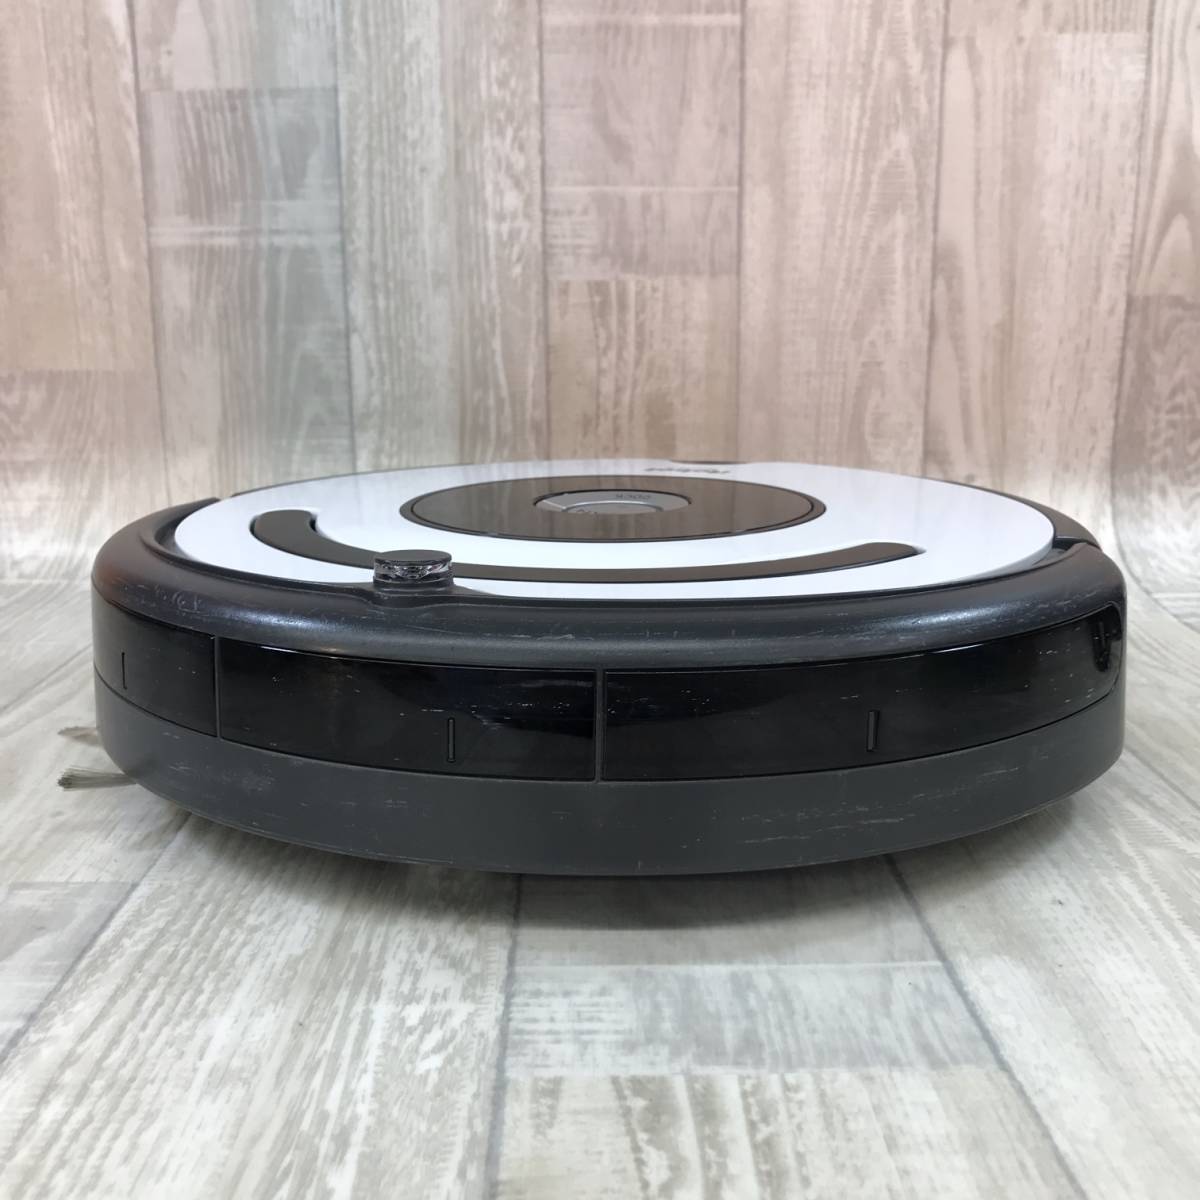 T2518*iRobot Roomba 628 robot vacuum cleaner *2018 year made dual virtual wall each part goods equipped 